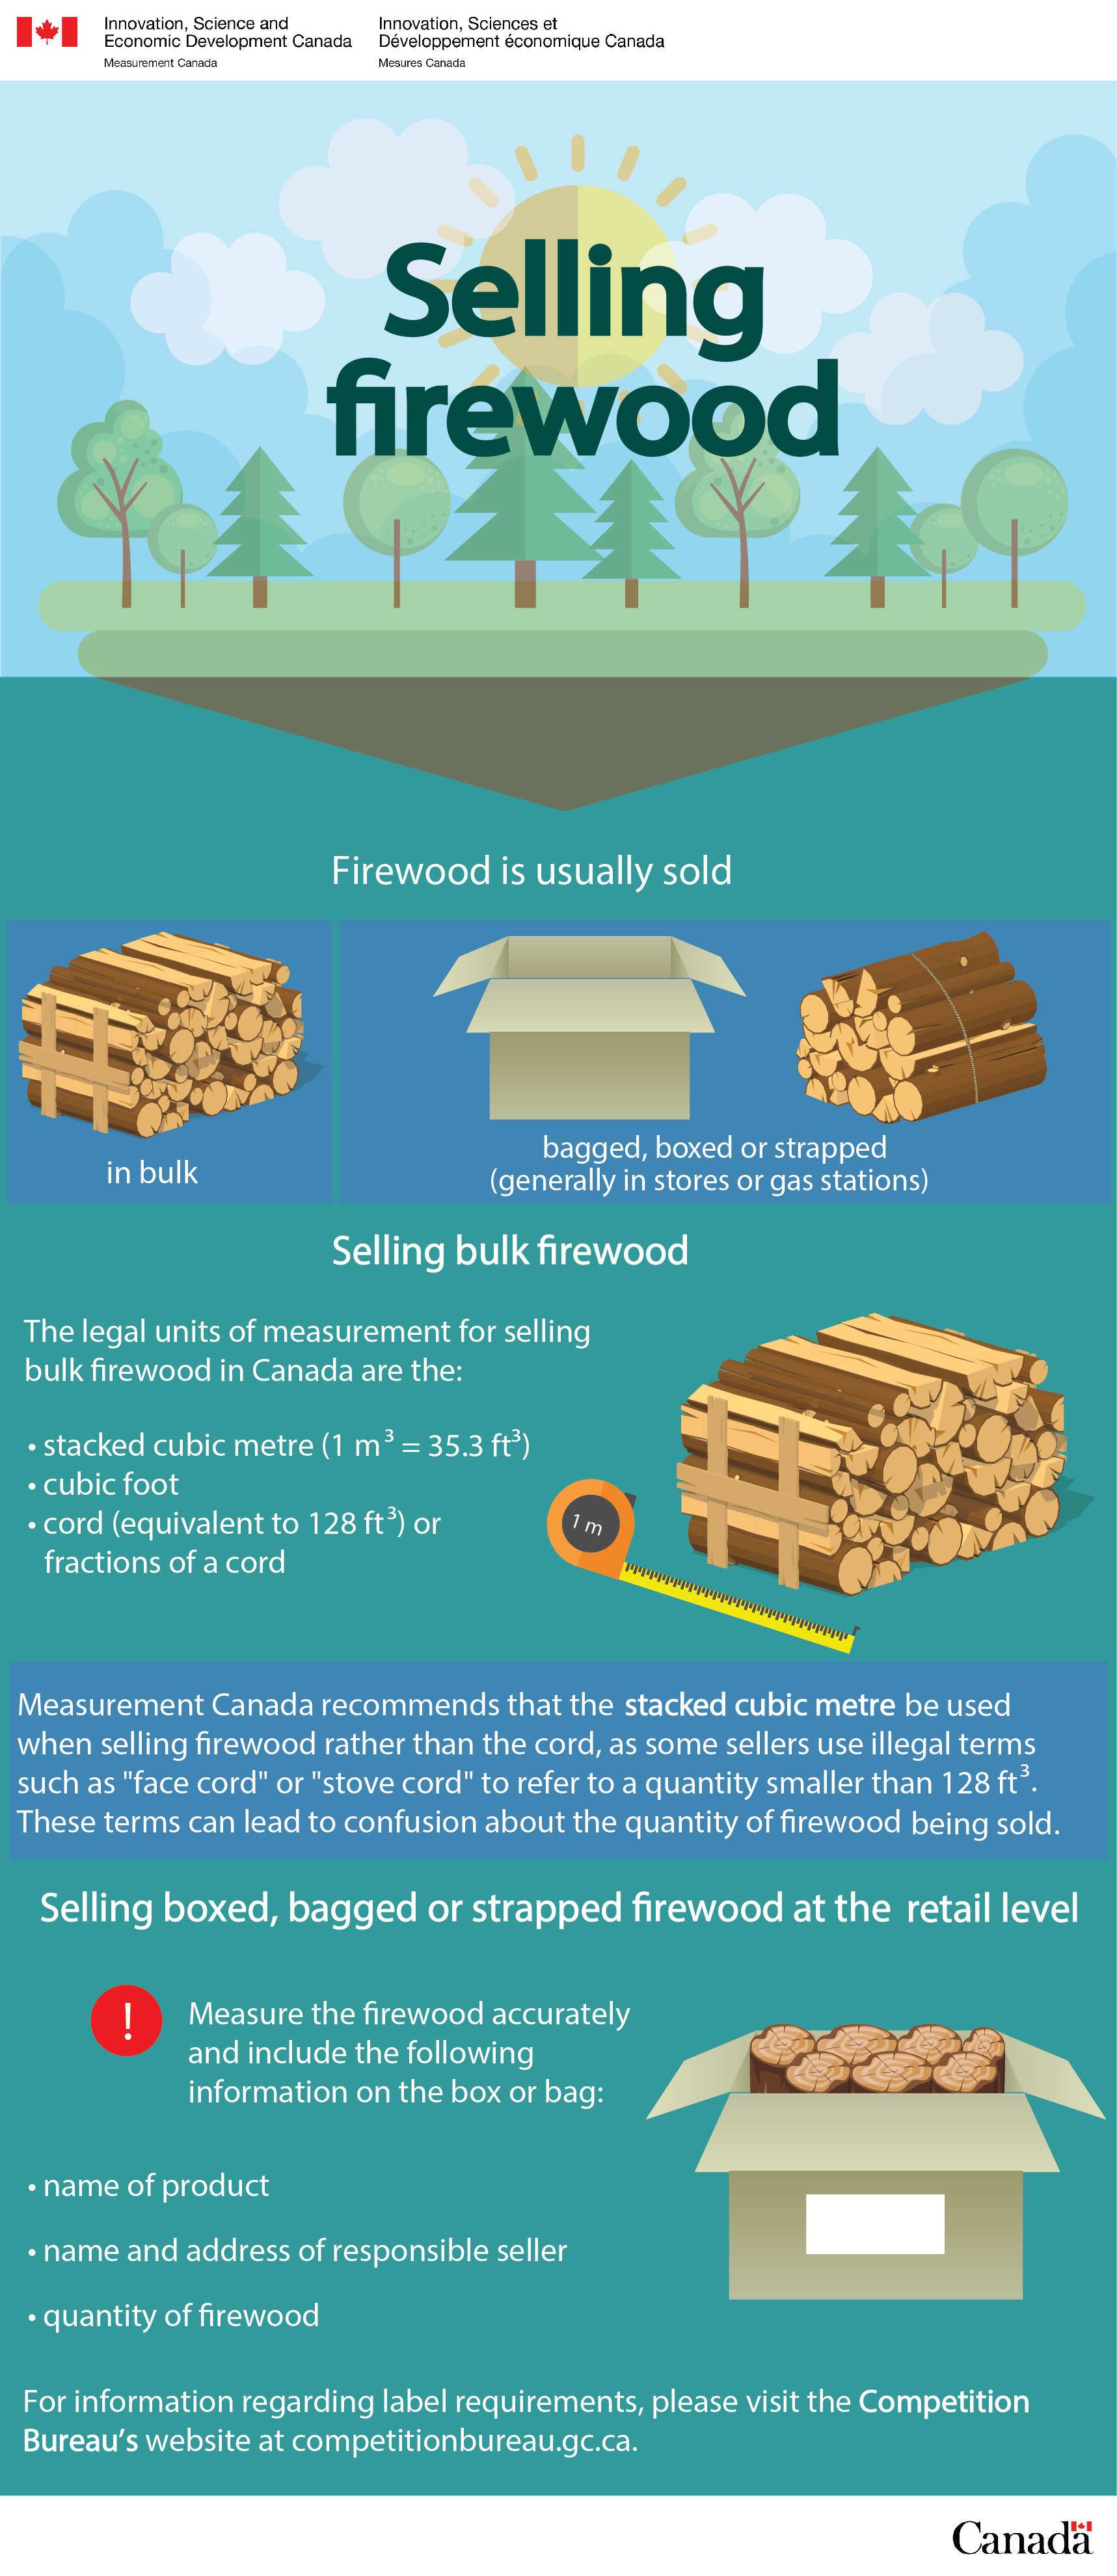 Selling firewood (the long description is located below the image)